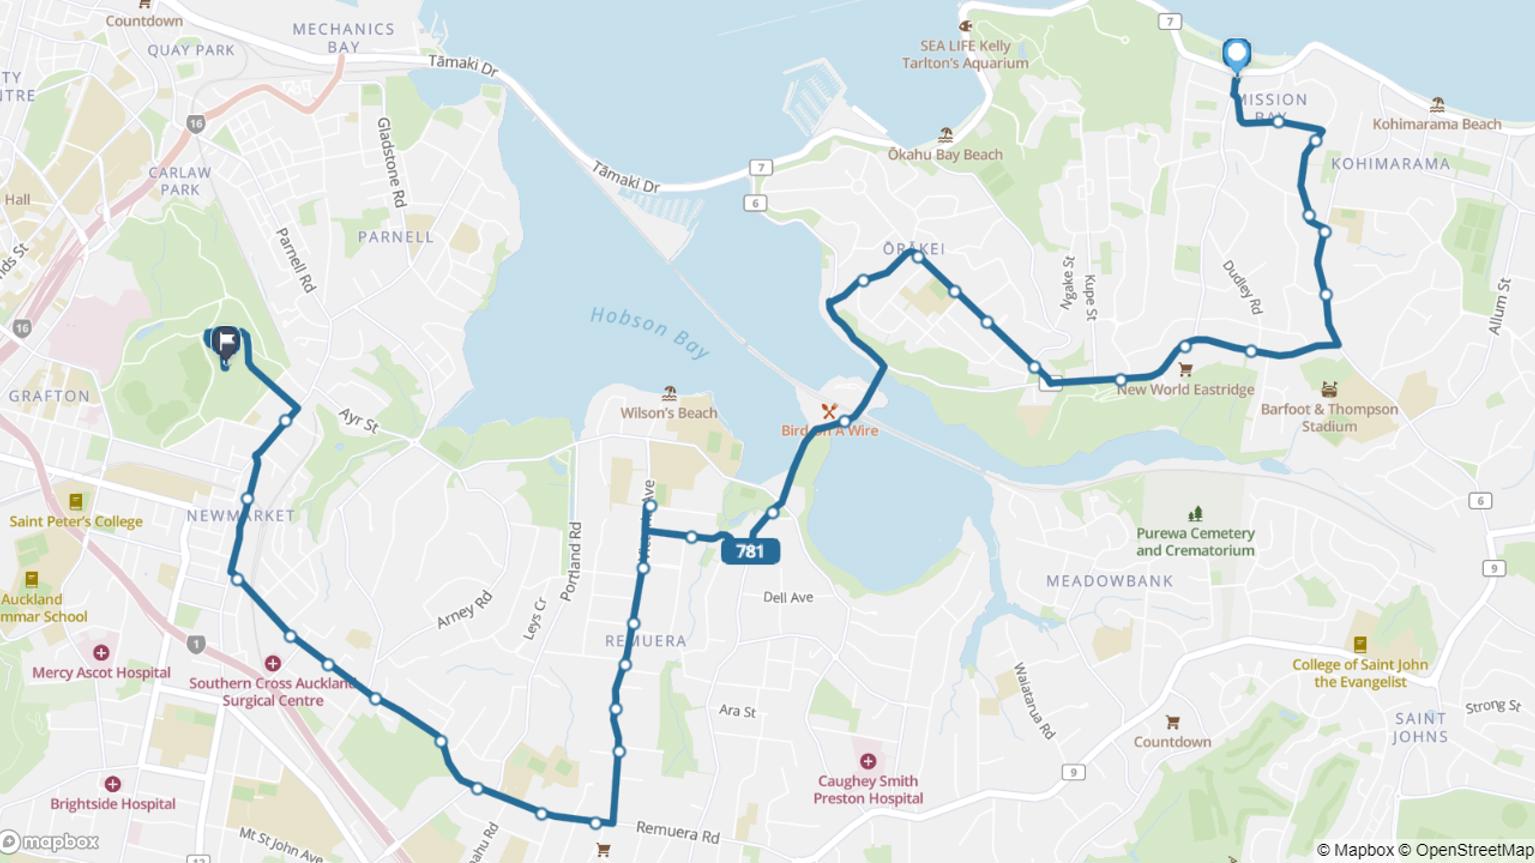 Mission Bay to Auckland Domain bus route 781 map